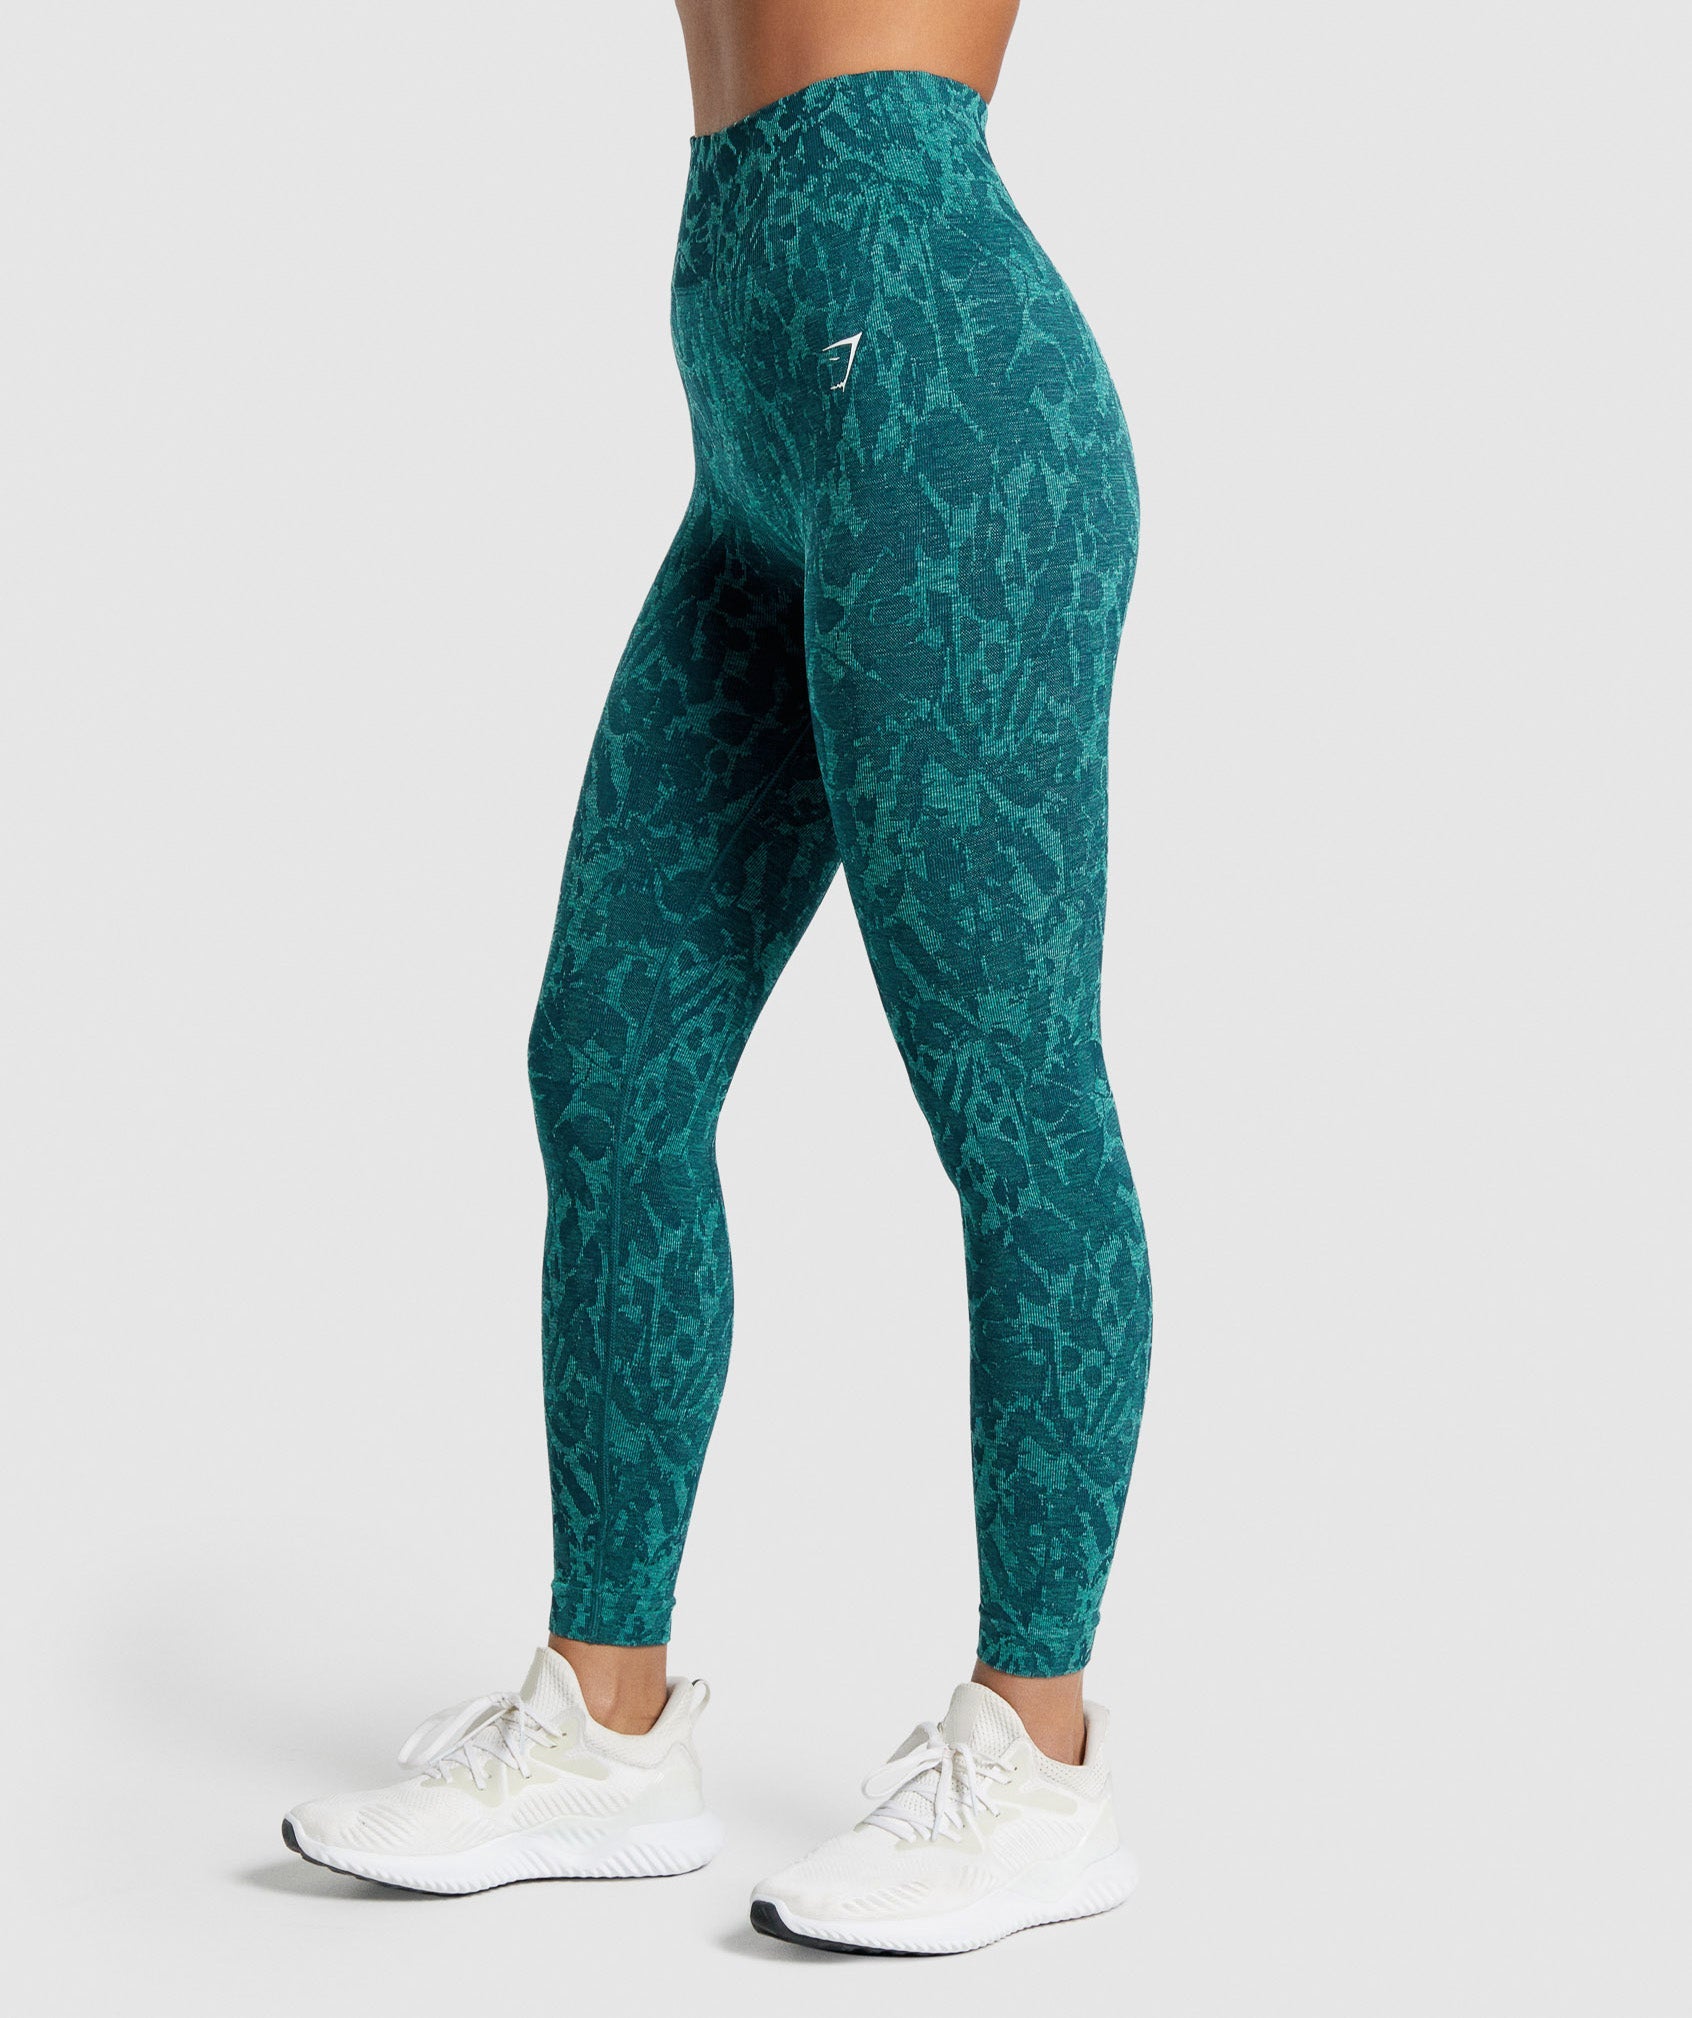 Adapt Animal Seamless Leggings in Butterfly | Teal - view 4